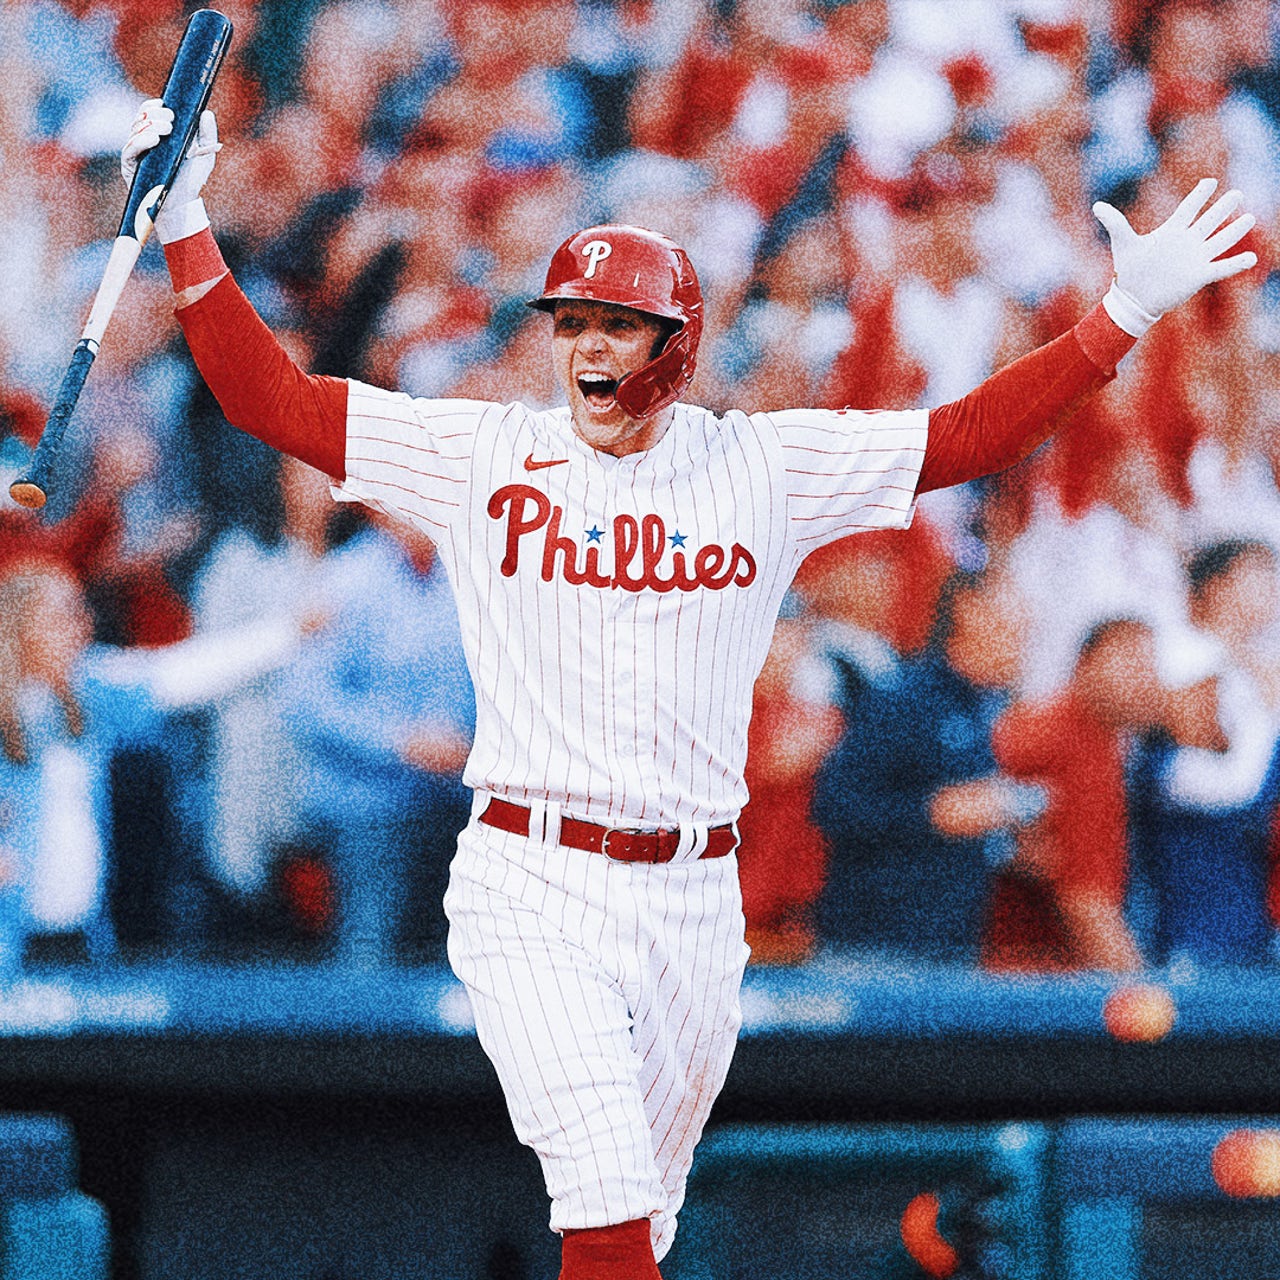 Philadelphia Phillies are 6-0 at Citizens Bank Park in 2022 MLB